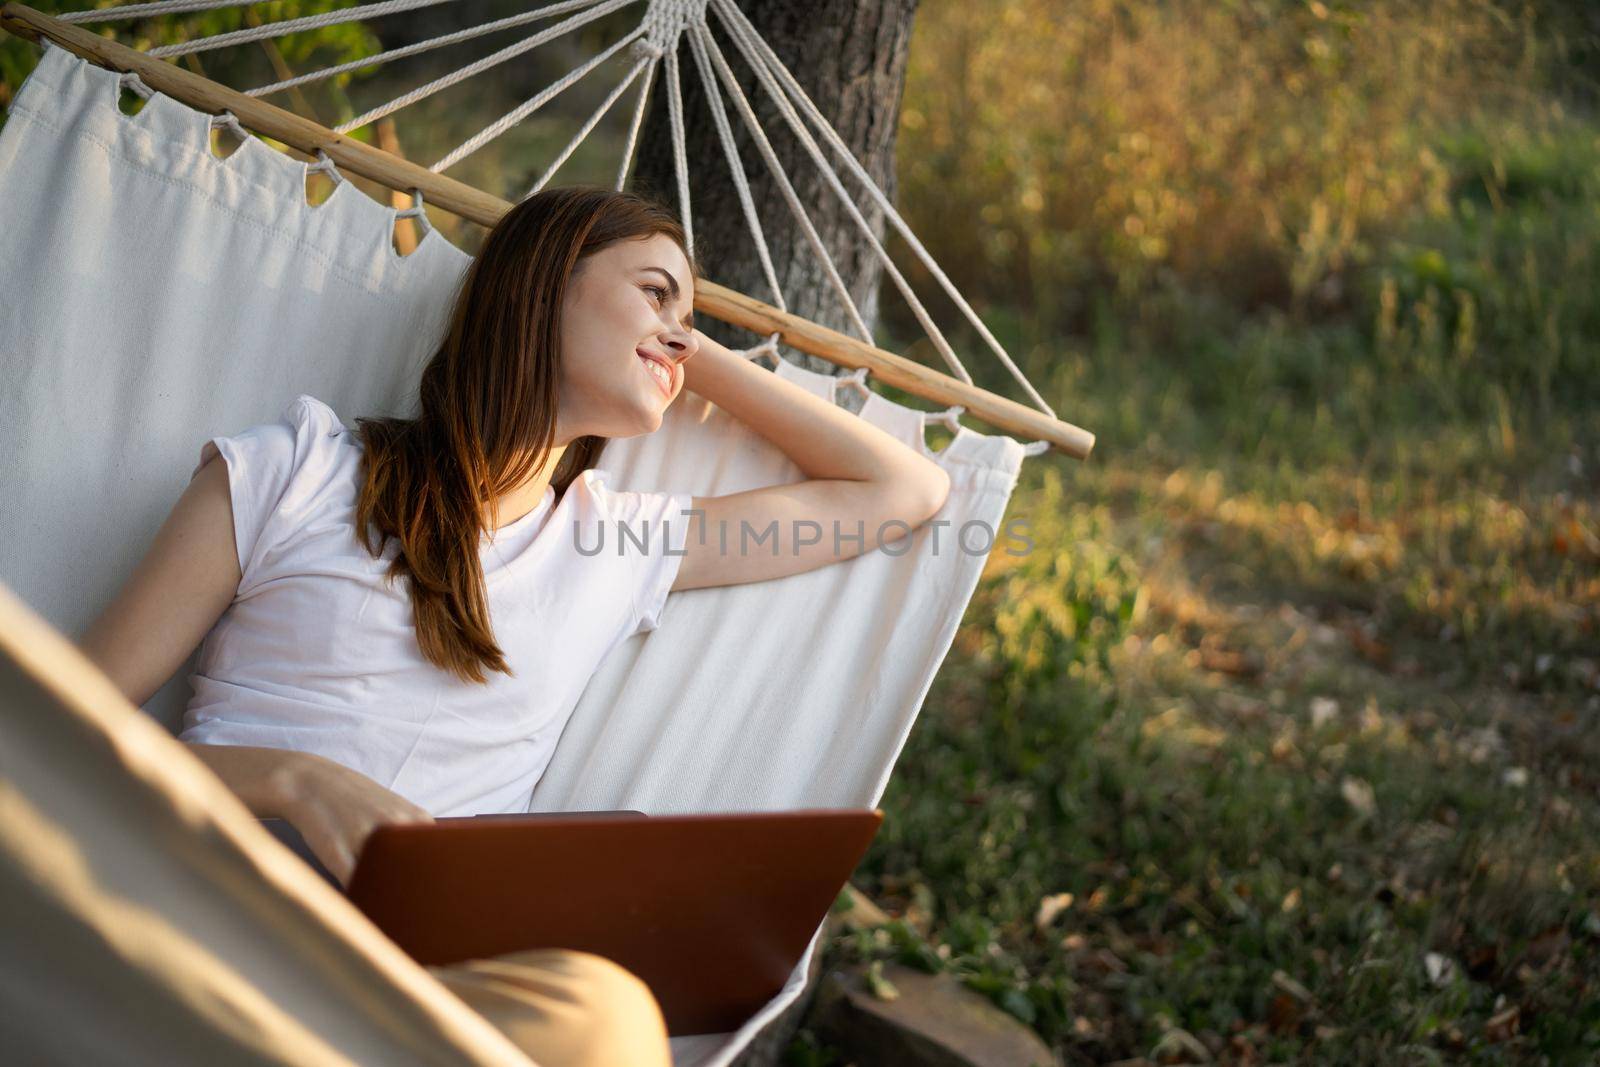 woman with laptop and lies in a hammock vacation nature freelance. High quality photo